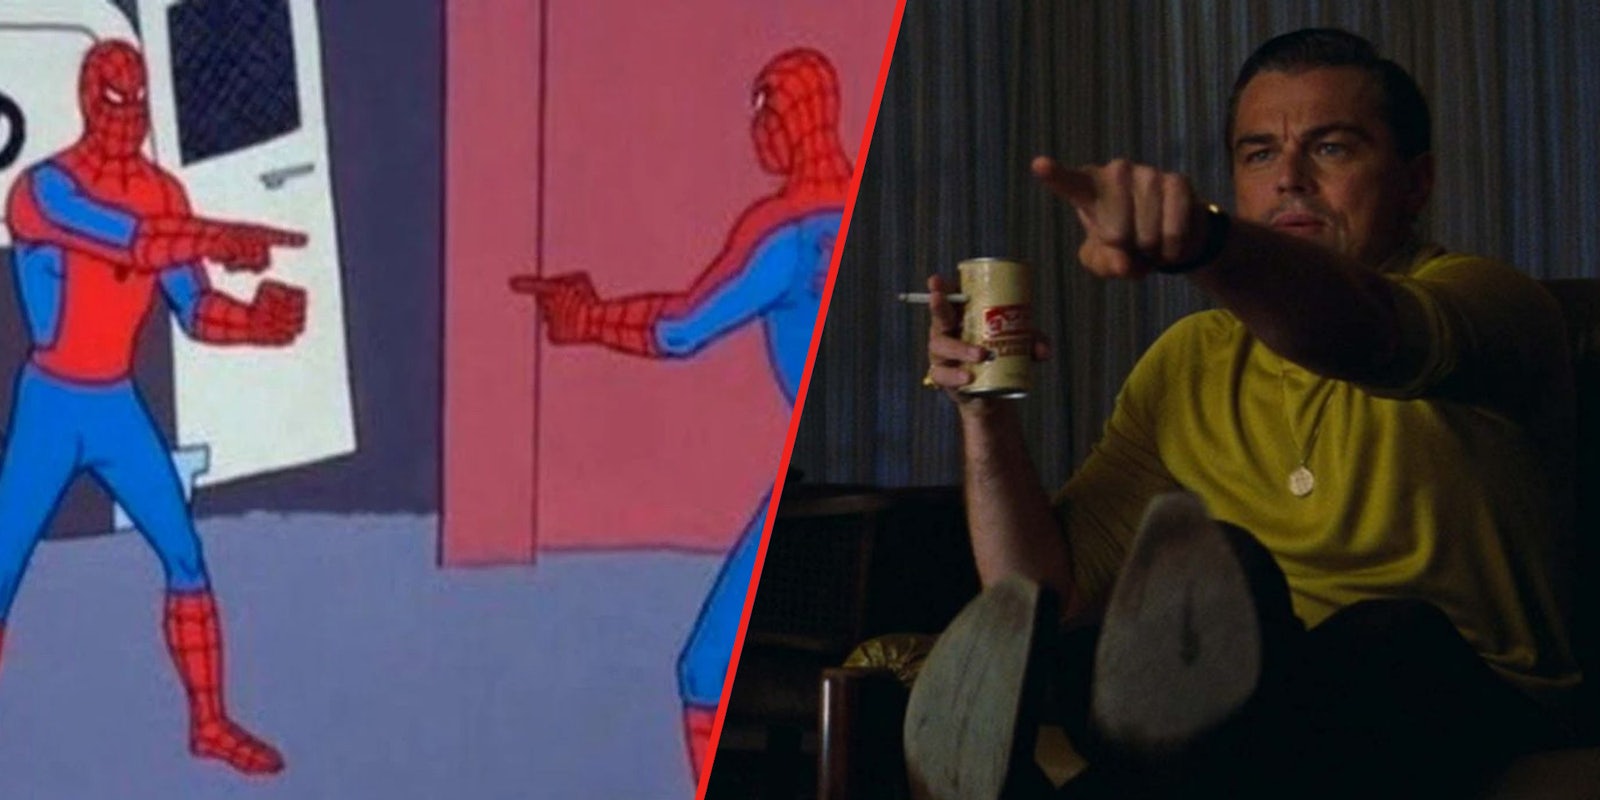 Spiderman pointing at other spiderman(l), Pointing Rick Dalton played by Leonardo Dicaprio(r)